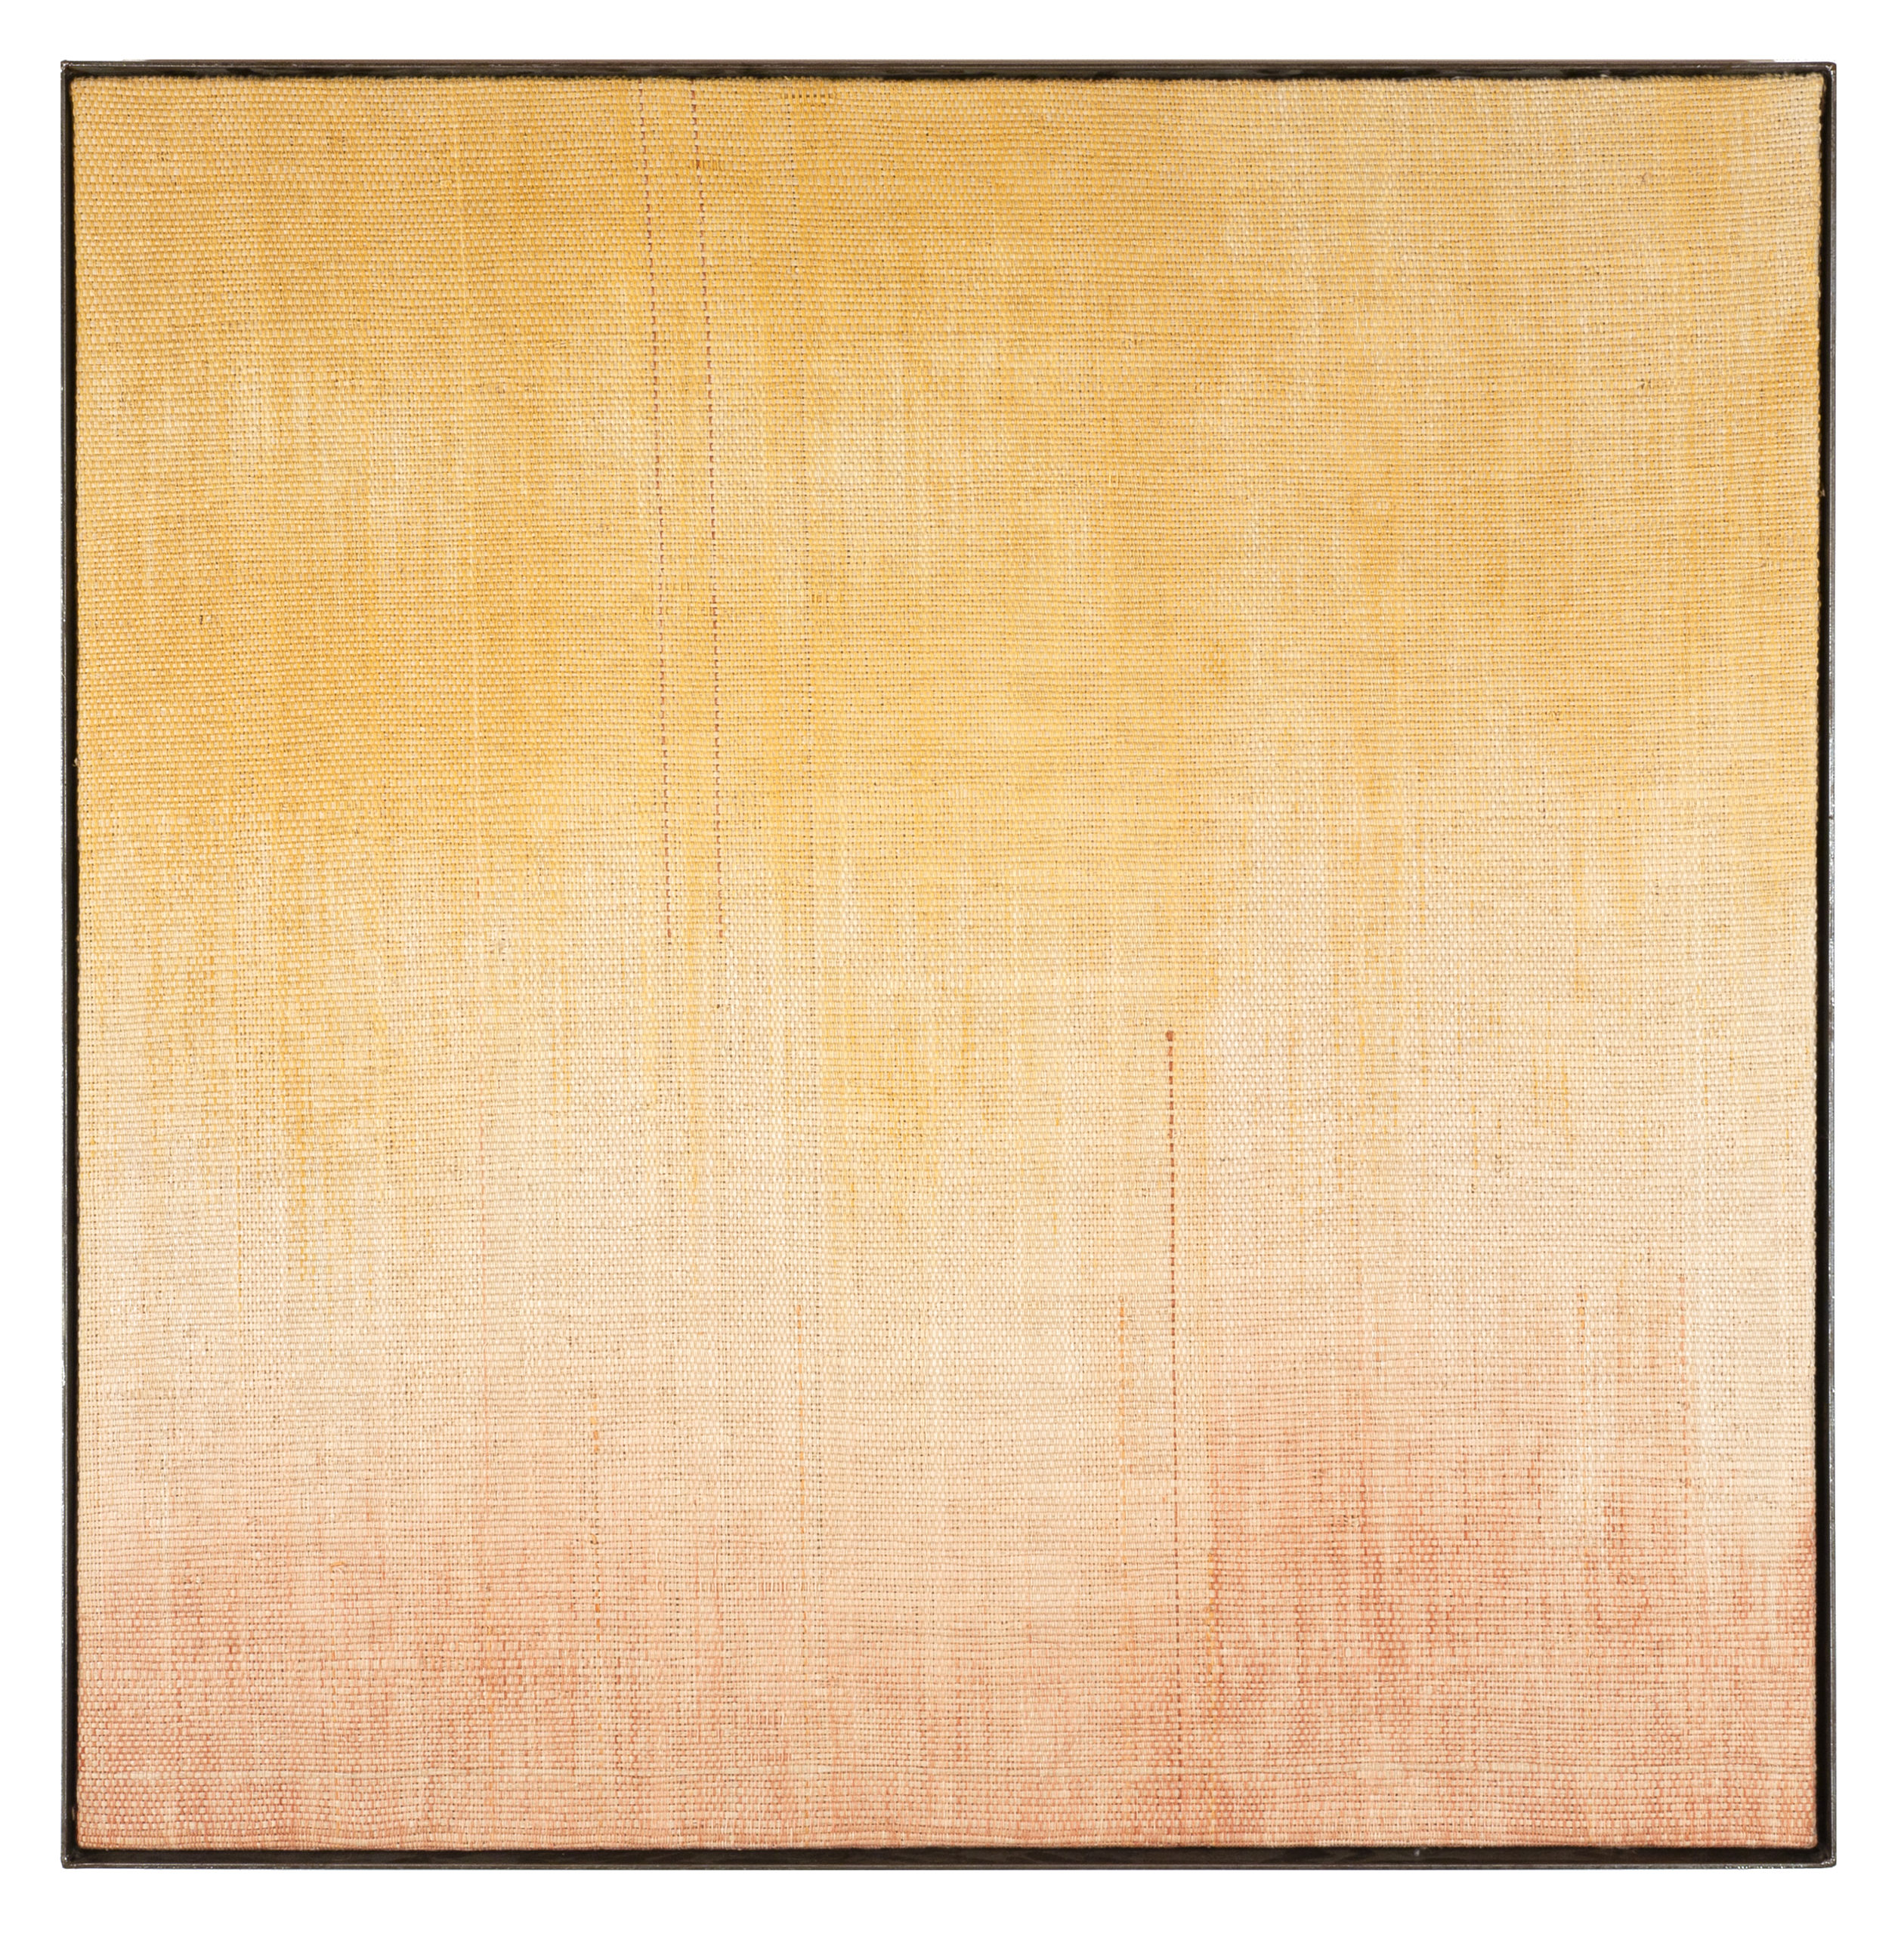 

											Elizabeth Hohimer</b>

											<em>
												Negotiated Desires</em> 

											<h4>
												May 21 - July 31											</h4>

		                																																													<i>Just a Little Bit Longer Where It's Warm,</i>  
																																								2021, 
																																								West Texas cotton dyed with collected clay, pine paper, and silk tapestry in steel frame, 
																																								37 x 36 3/4 x 2 1/2 in 
																								
		                				